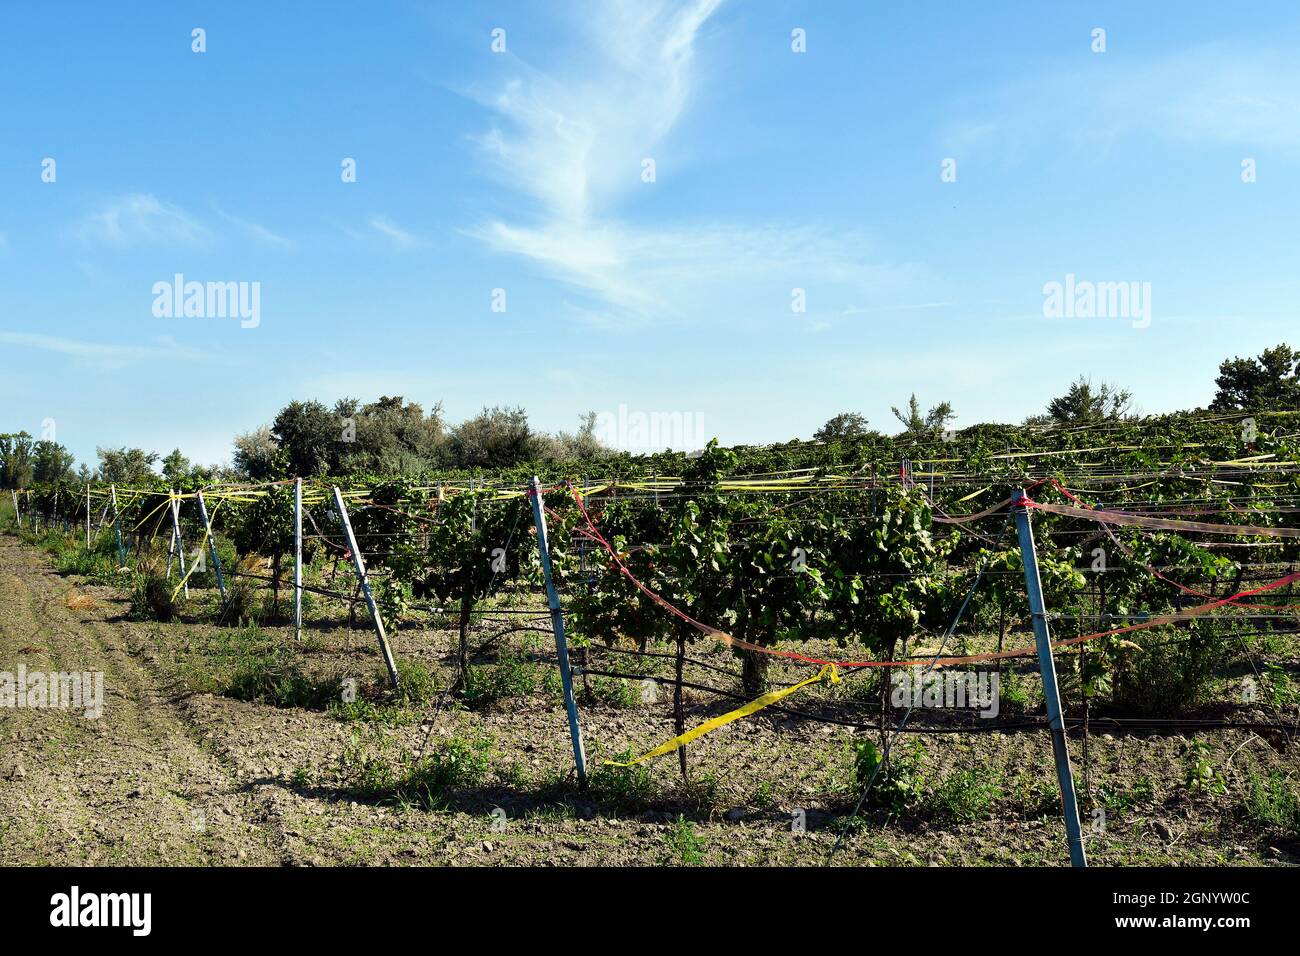 Austria, Grapevines protected with colored ribbons as a deterrent against bird damage in Neusiedlersee-Seewinkel national park in Burgenland in the Pa Stock Photo